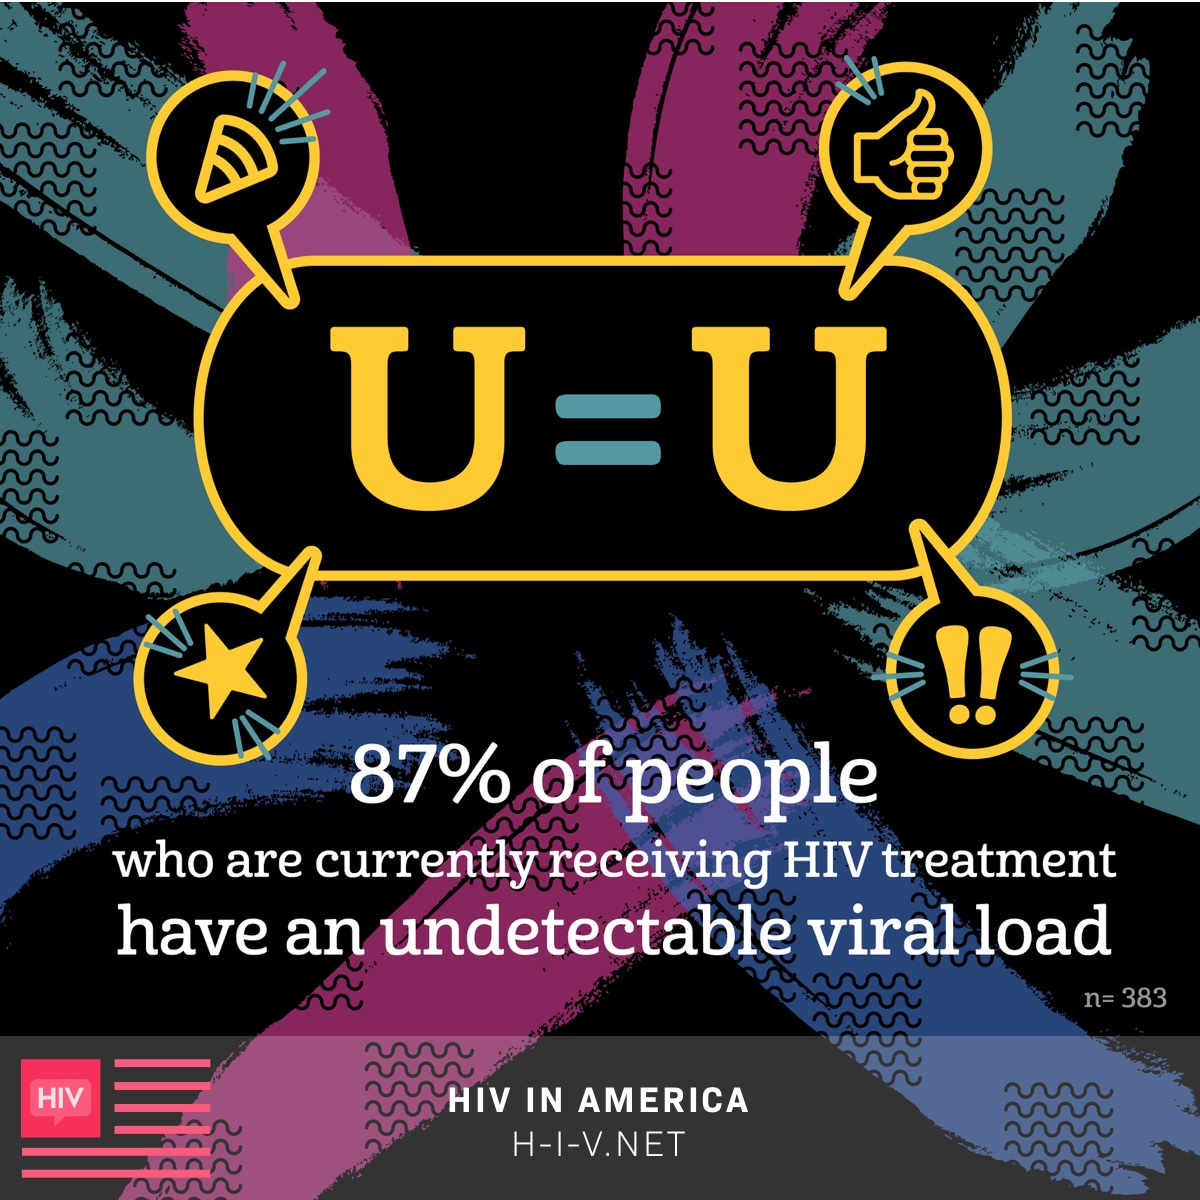 87% of people currently receiving HIV treatment have an undetectable viral load